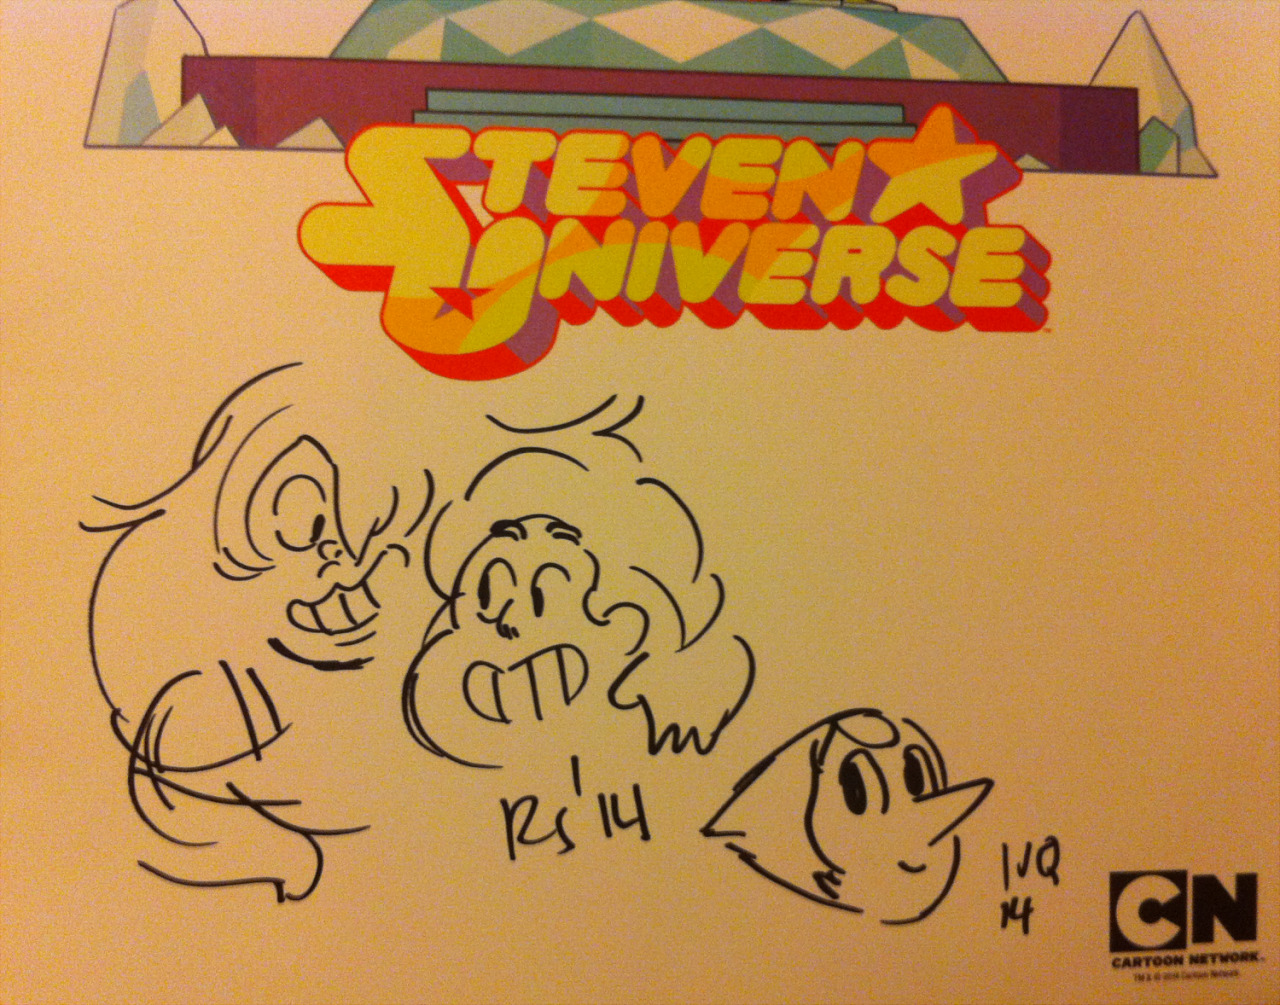 Some amazingly adorable drawings by Rebecca Sugar and Ian Jones-Quartey my sister